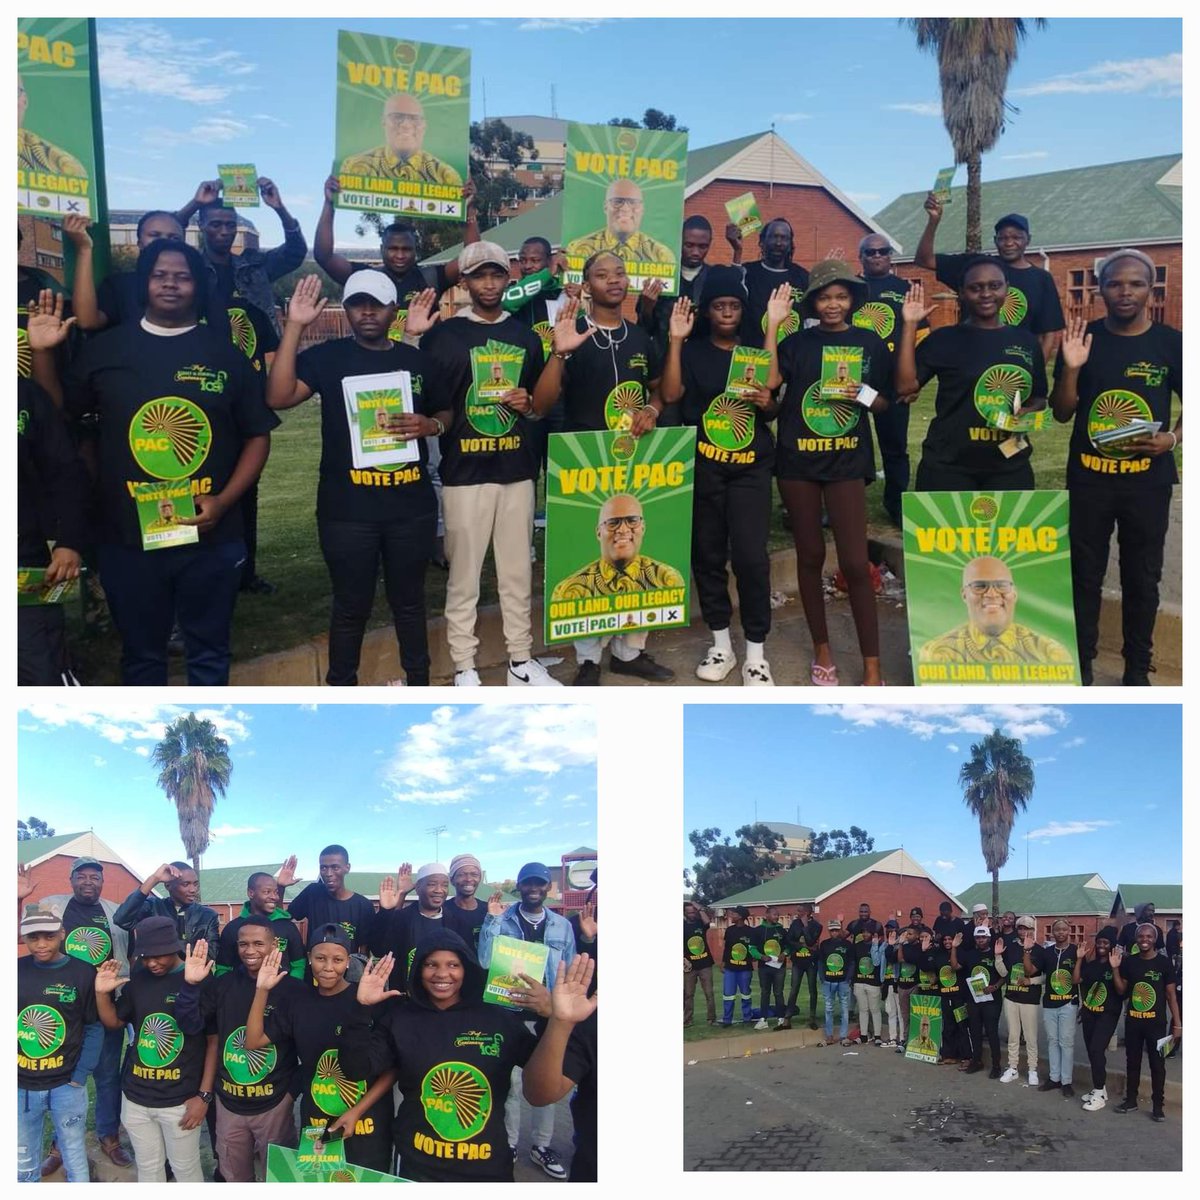 Proud of our grassroots efforts in the 2024 elections! With the support of our community and the dedication of Sol Plaatjie University PASMA in Kimberley, the PAC continues to champion the cause of African unity and empowerment. Onward and upward! #VivaPAC #VotePAC